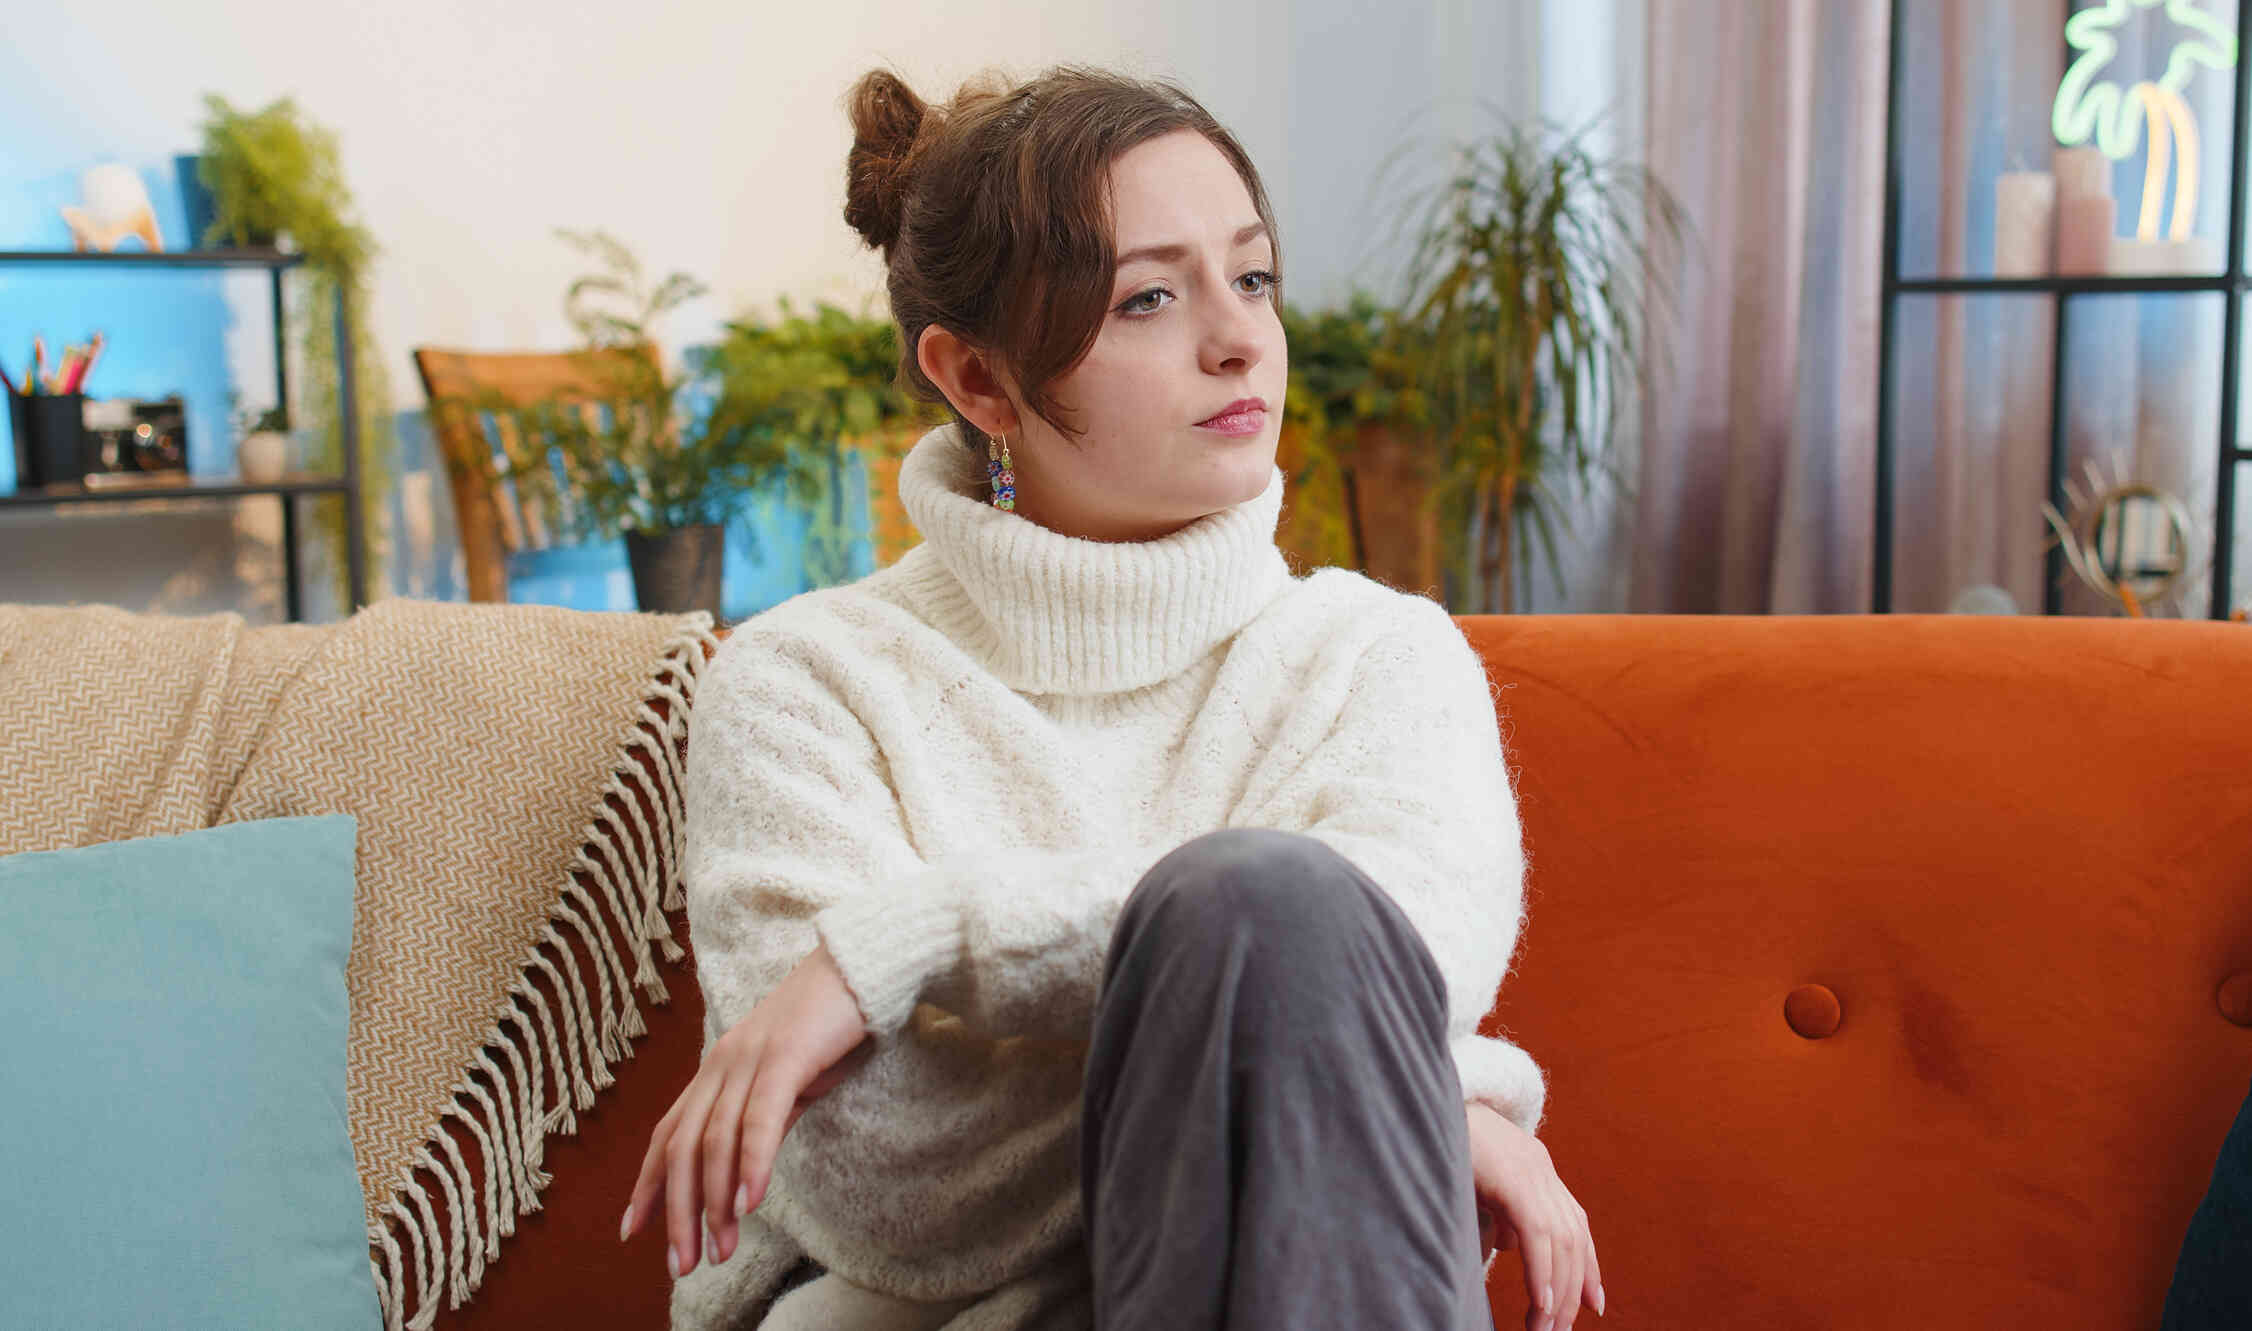 A woman in a white tutleneck sits casualy on the couch and gazes off while deep in thought.